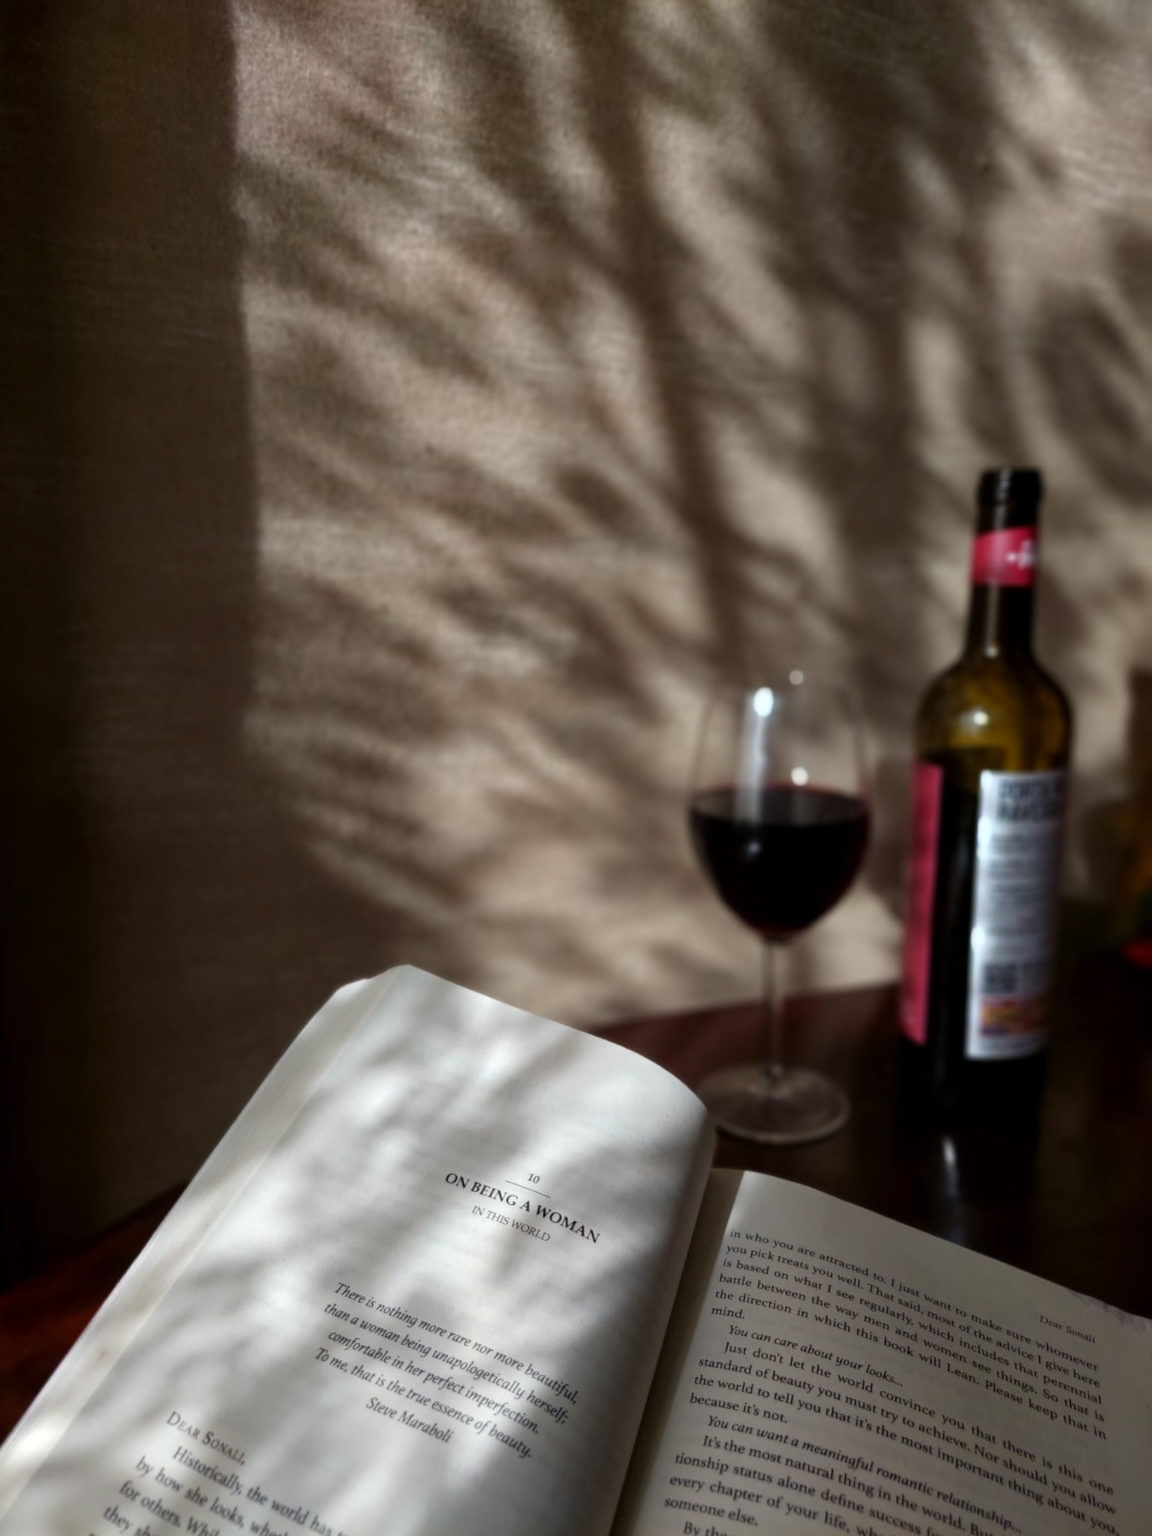 reading a book . a wine bottle and wine glass are visible in the background